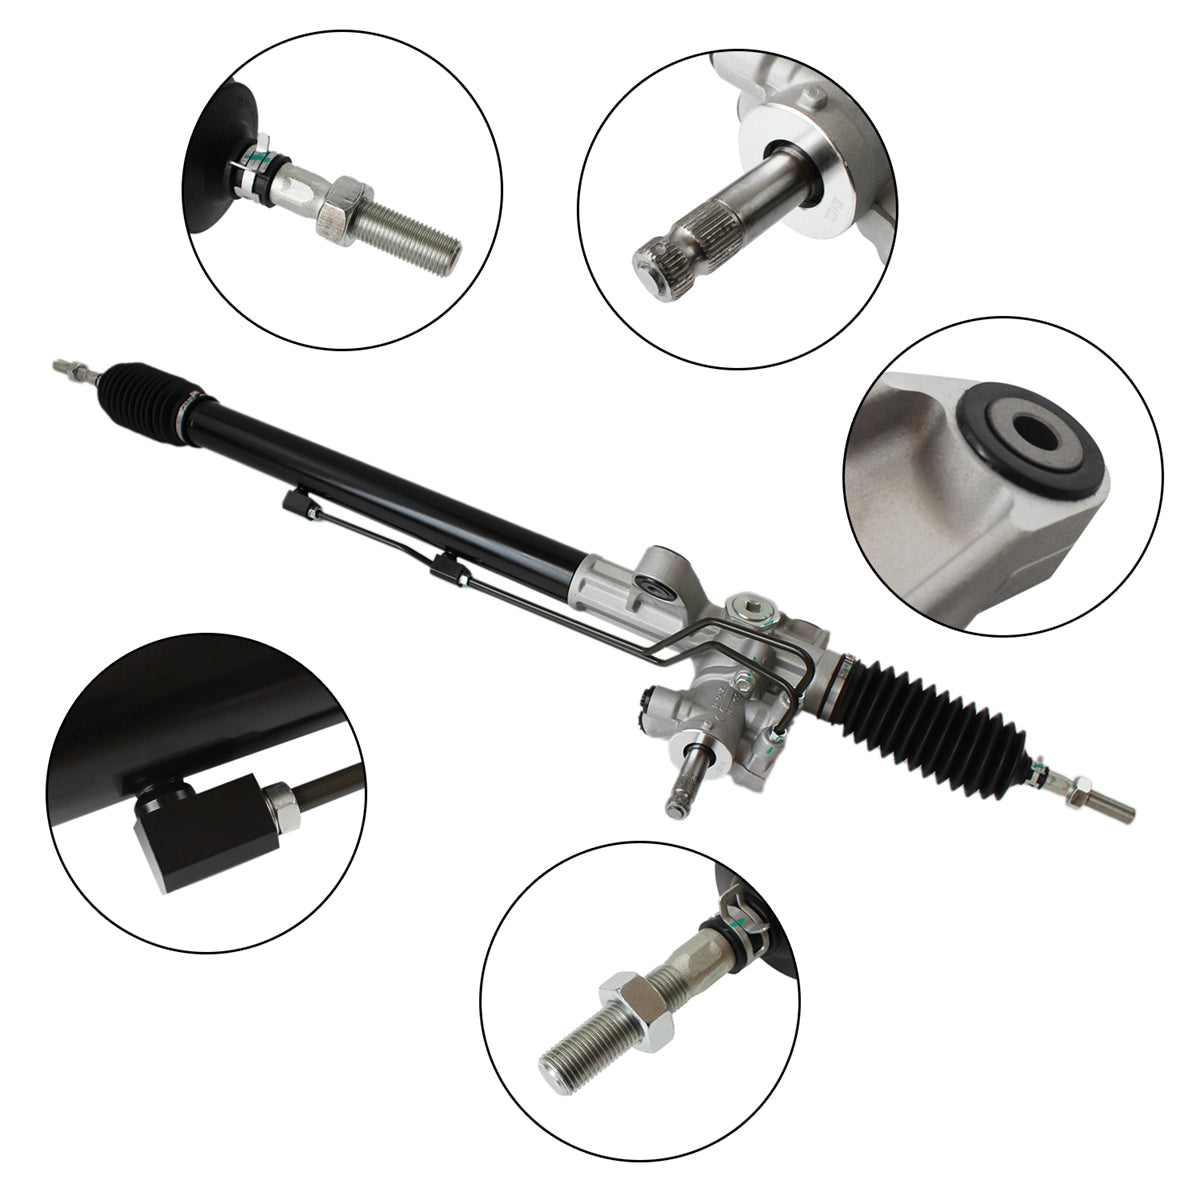 Daysyore® Power Steering Rack and Pinion for 2003-2007 Honda Accord 2.4L 04-08 Acura TL 3.2L 26-2703